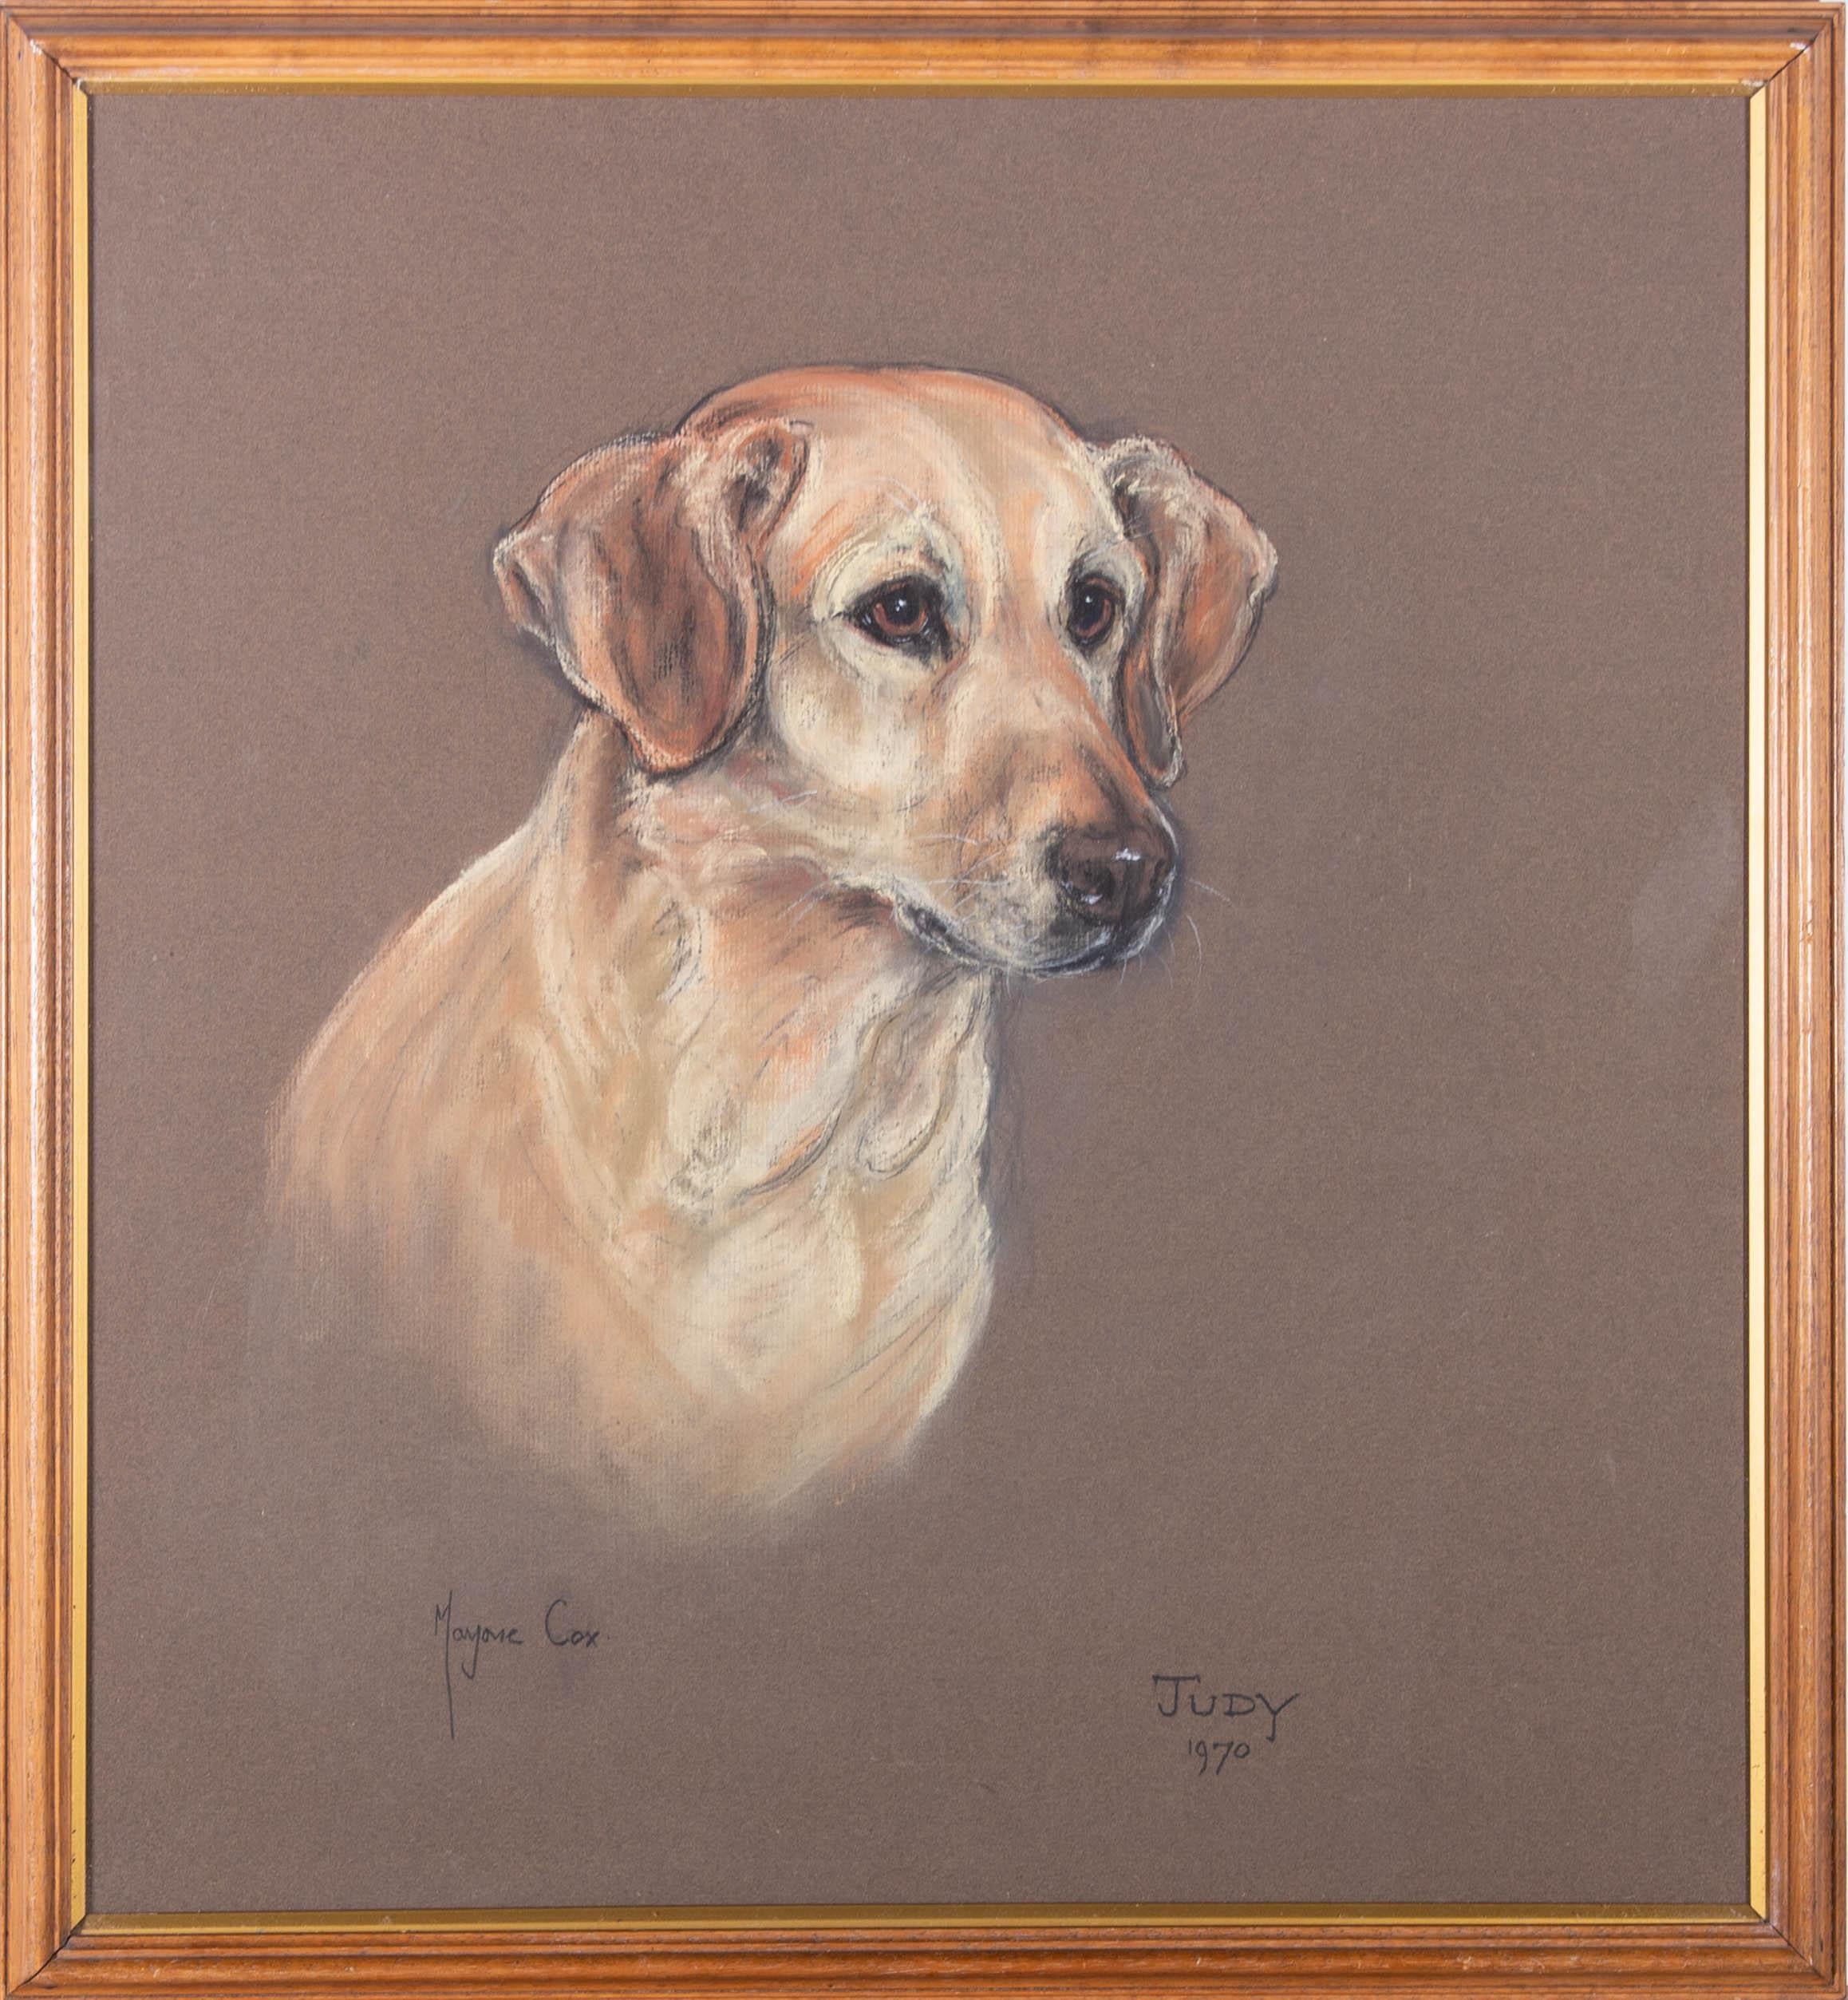 Judy the charming Yellow Labrador is drawn in fine pastel detail by well-listed artist Marjorie Cox. With a masterful technique, Cox captures the adorable features of Judy's face through intricate lines and bold highlights. Signed, dated and titled